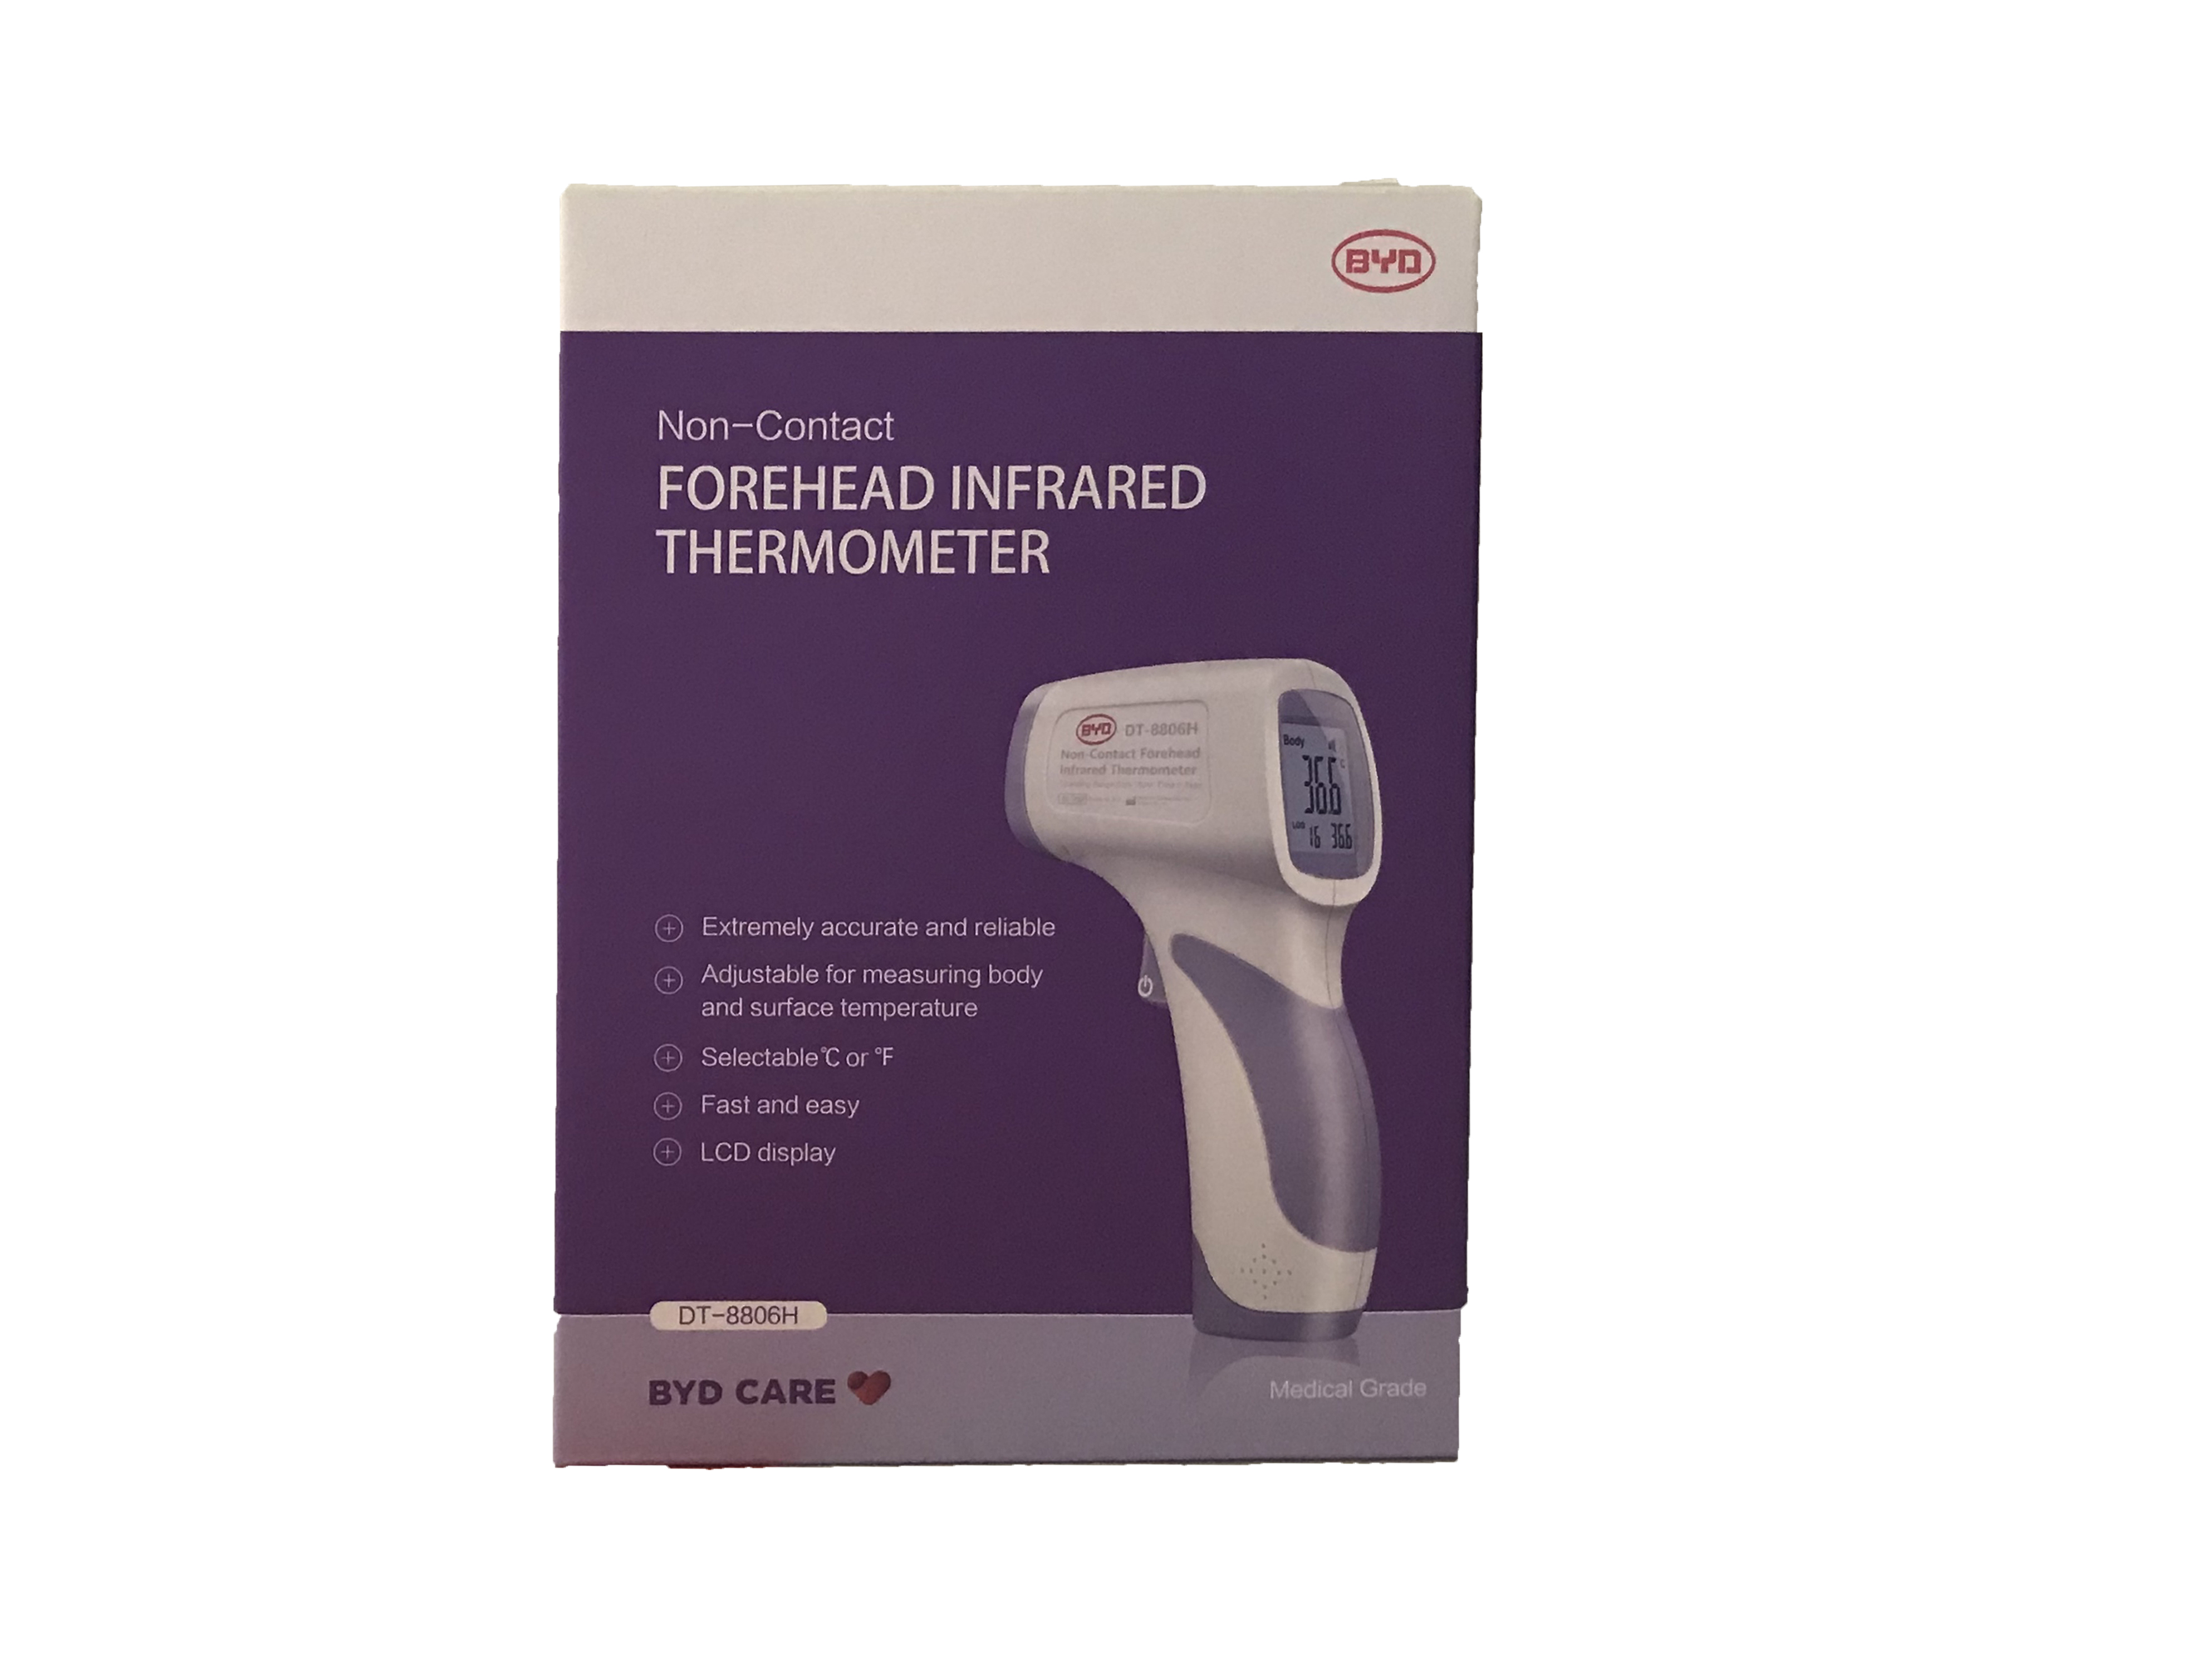 BYD CARE Forehead Infared Thermometer DT-8806H